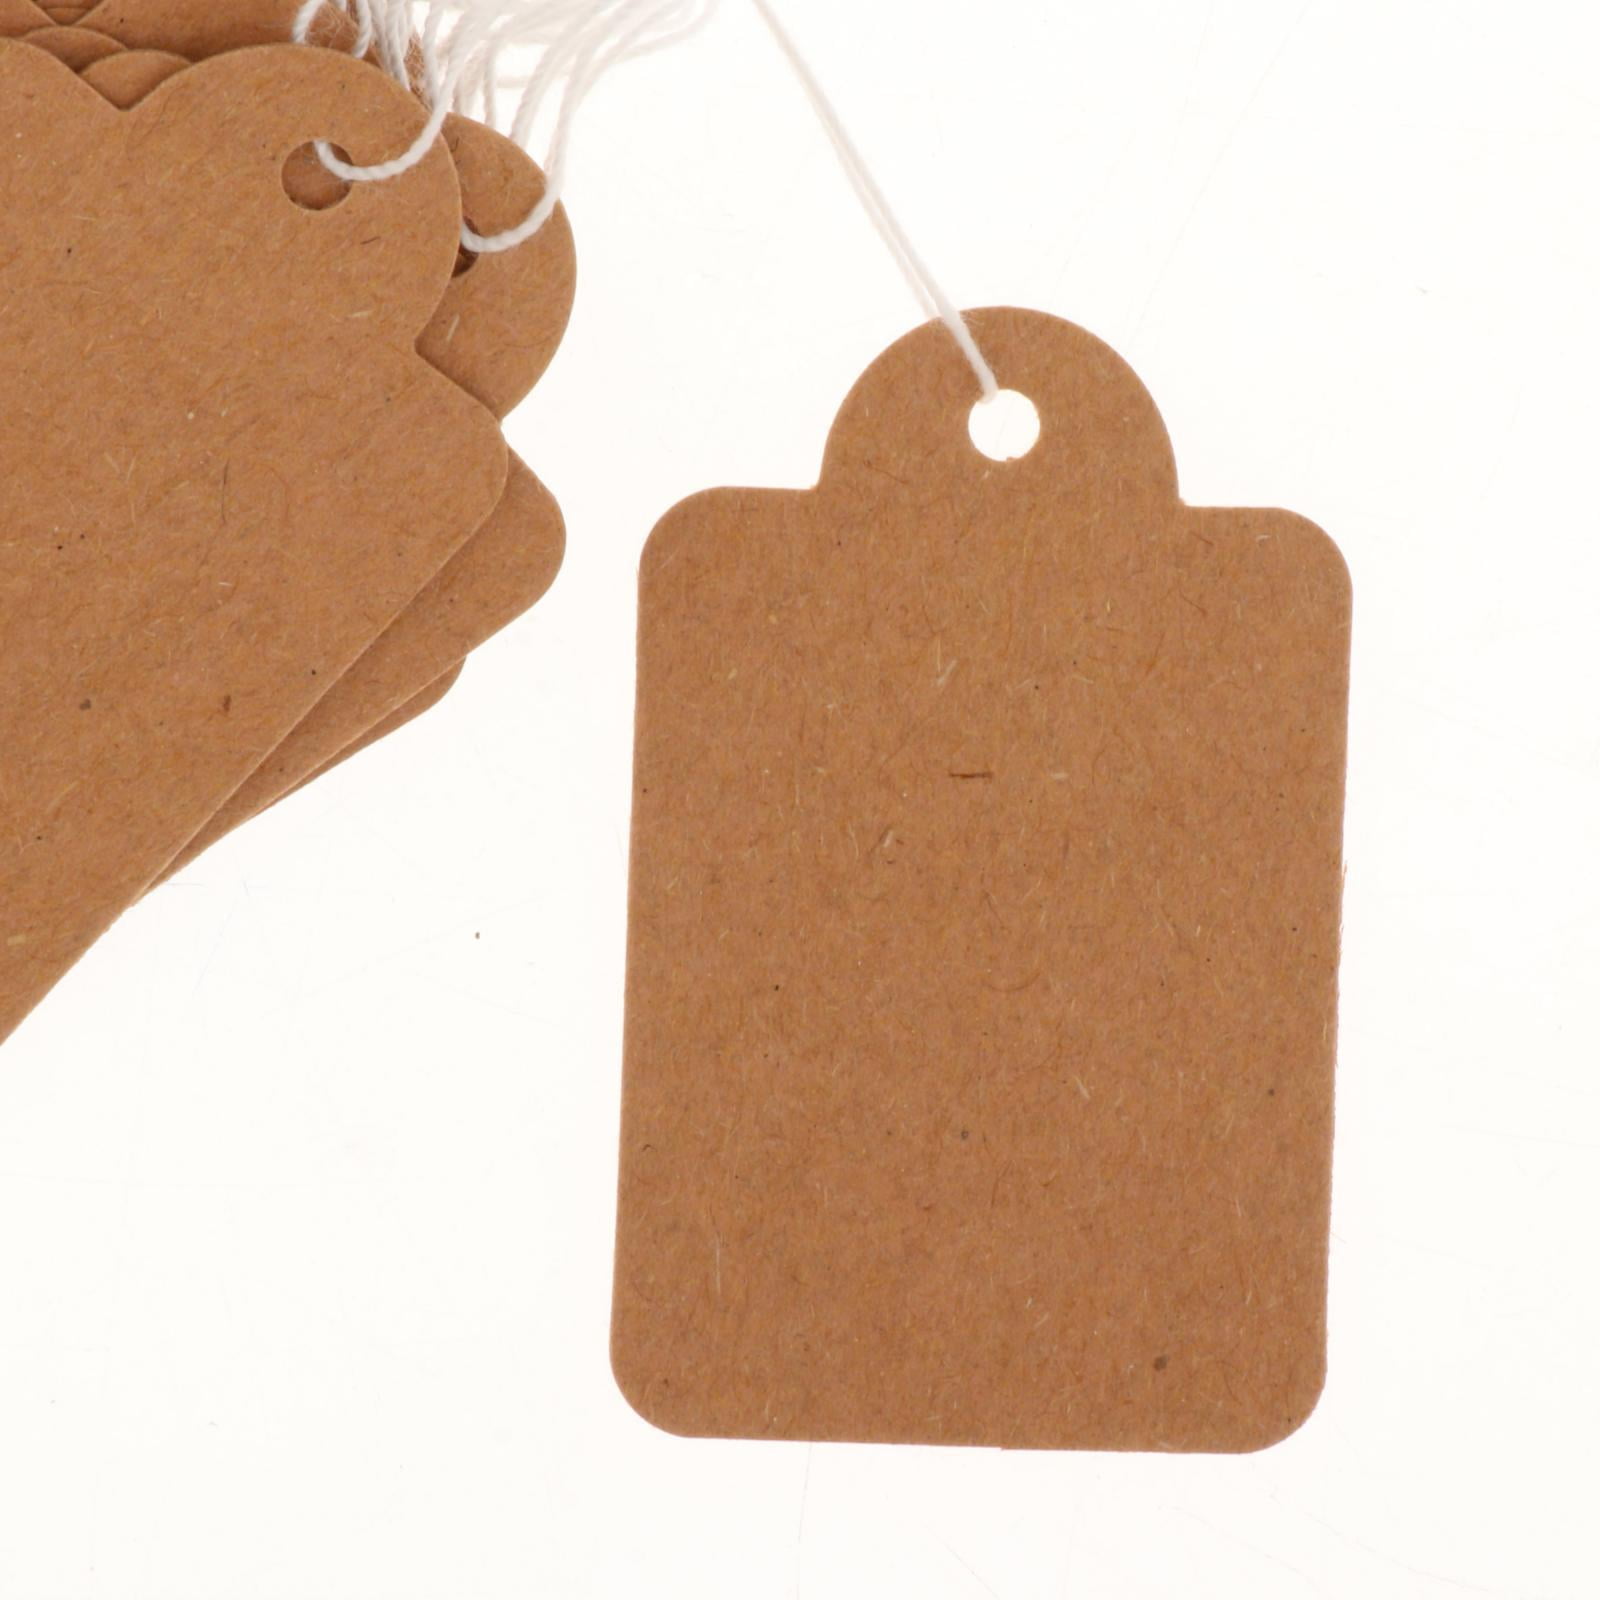 100x Paper Tags Price Hanging Labels with String Attached Marking